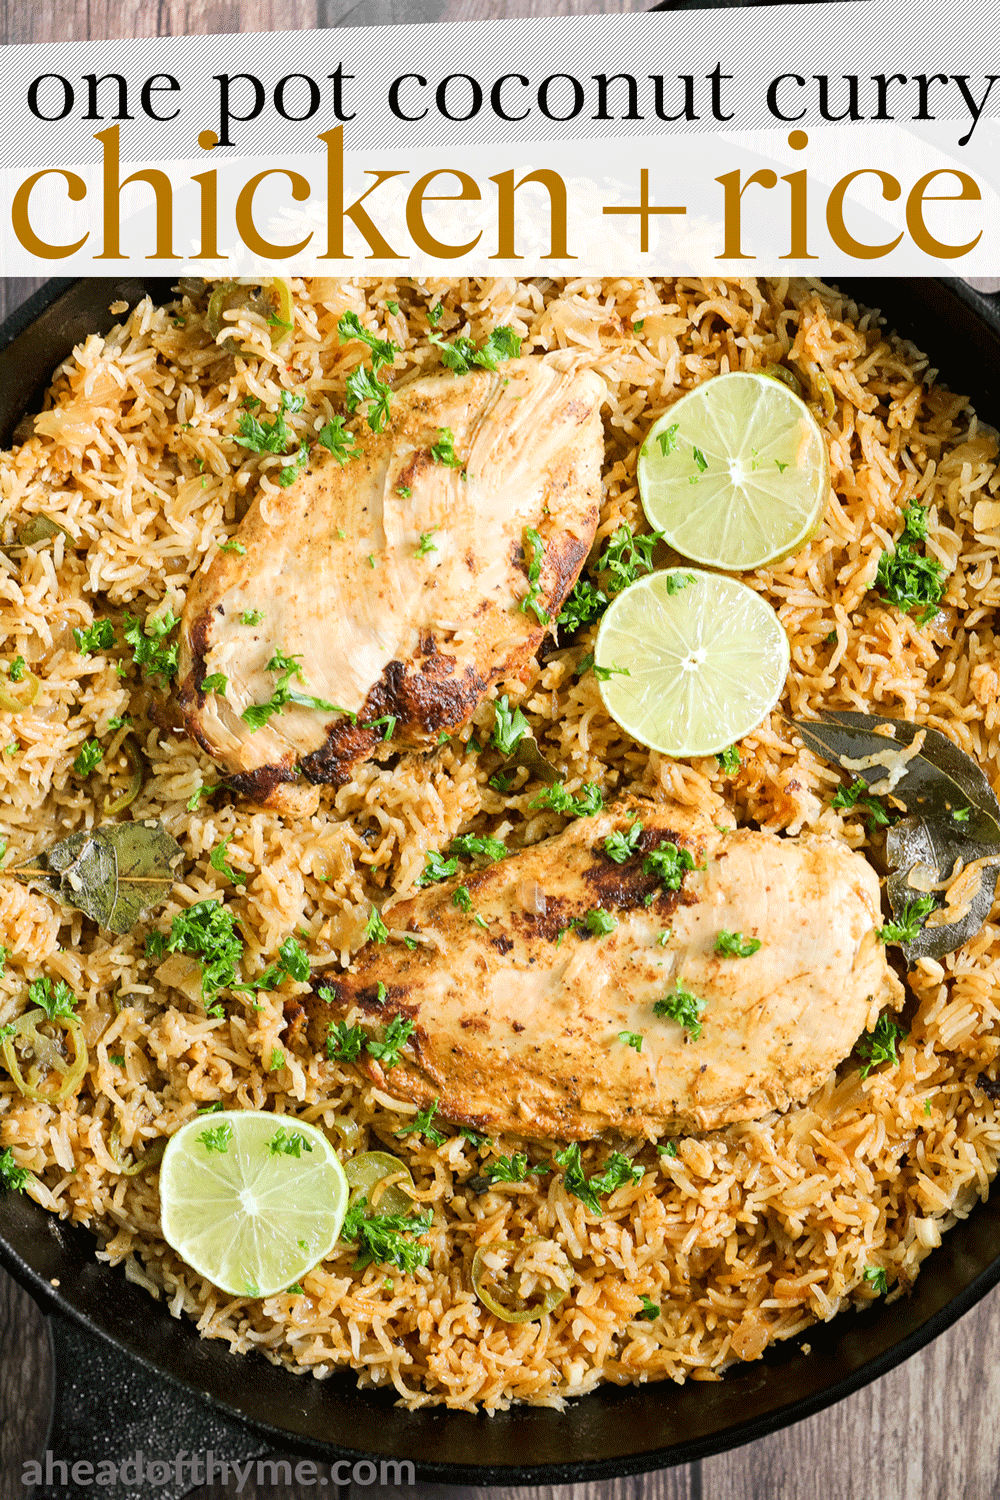 One Pot Coconut Curry Chicken and Rice